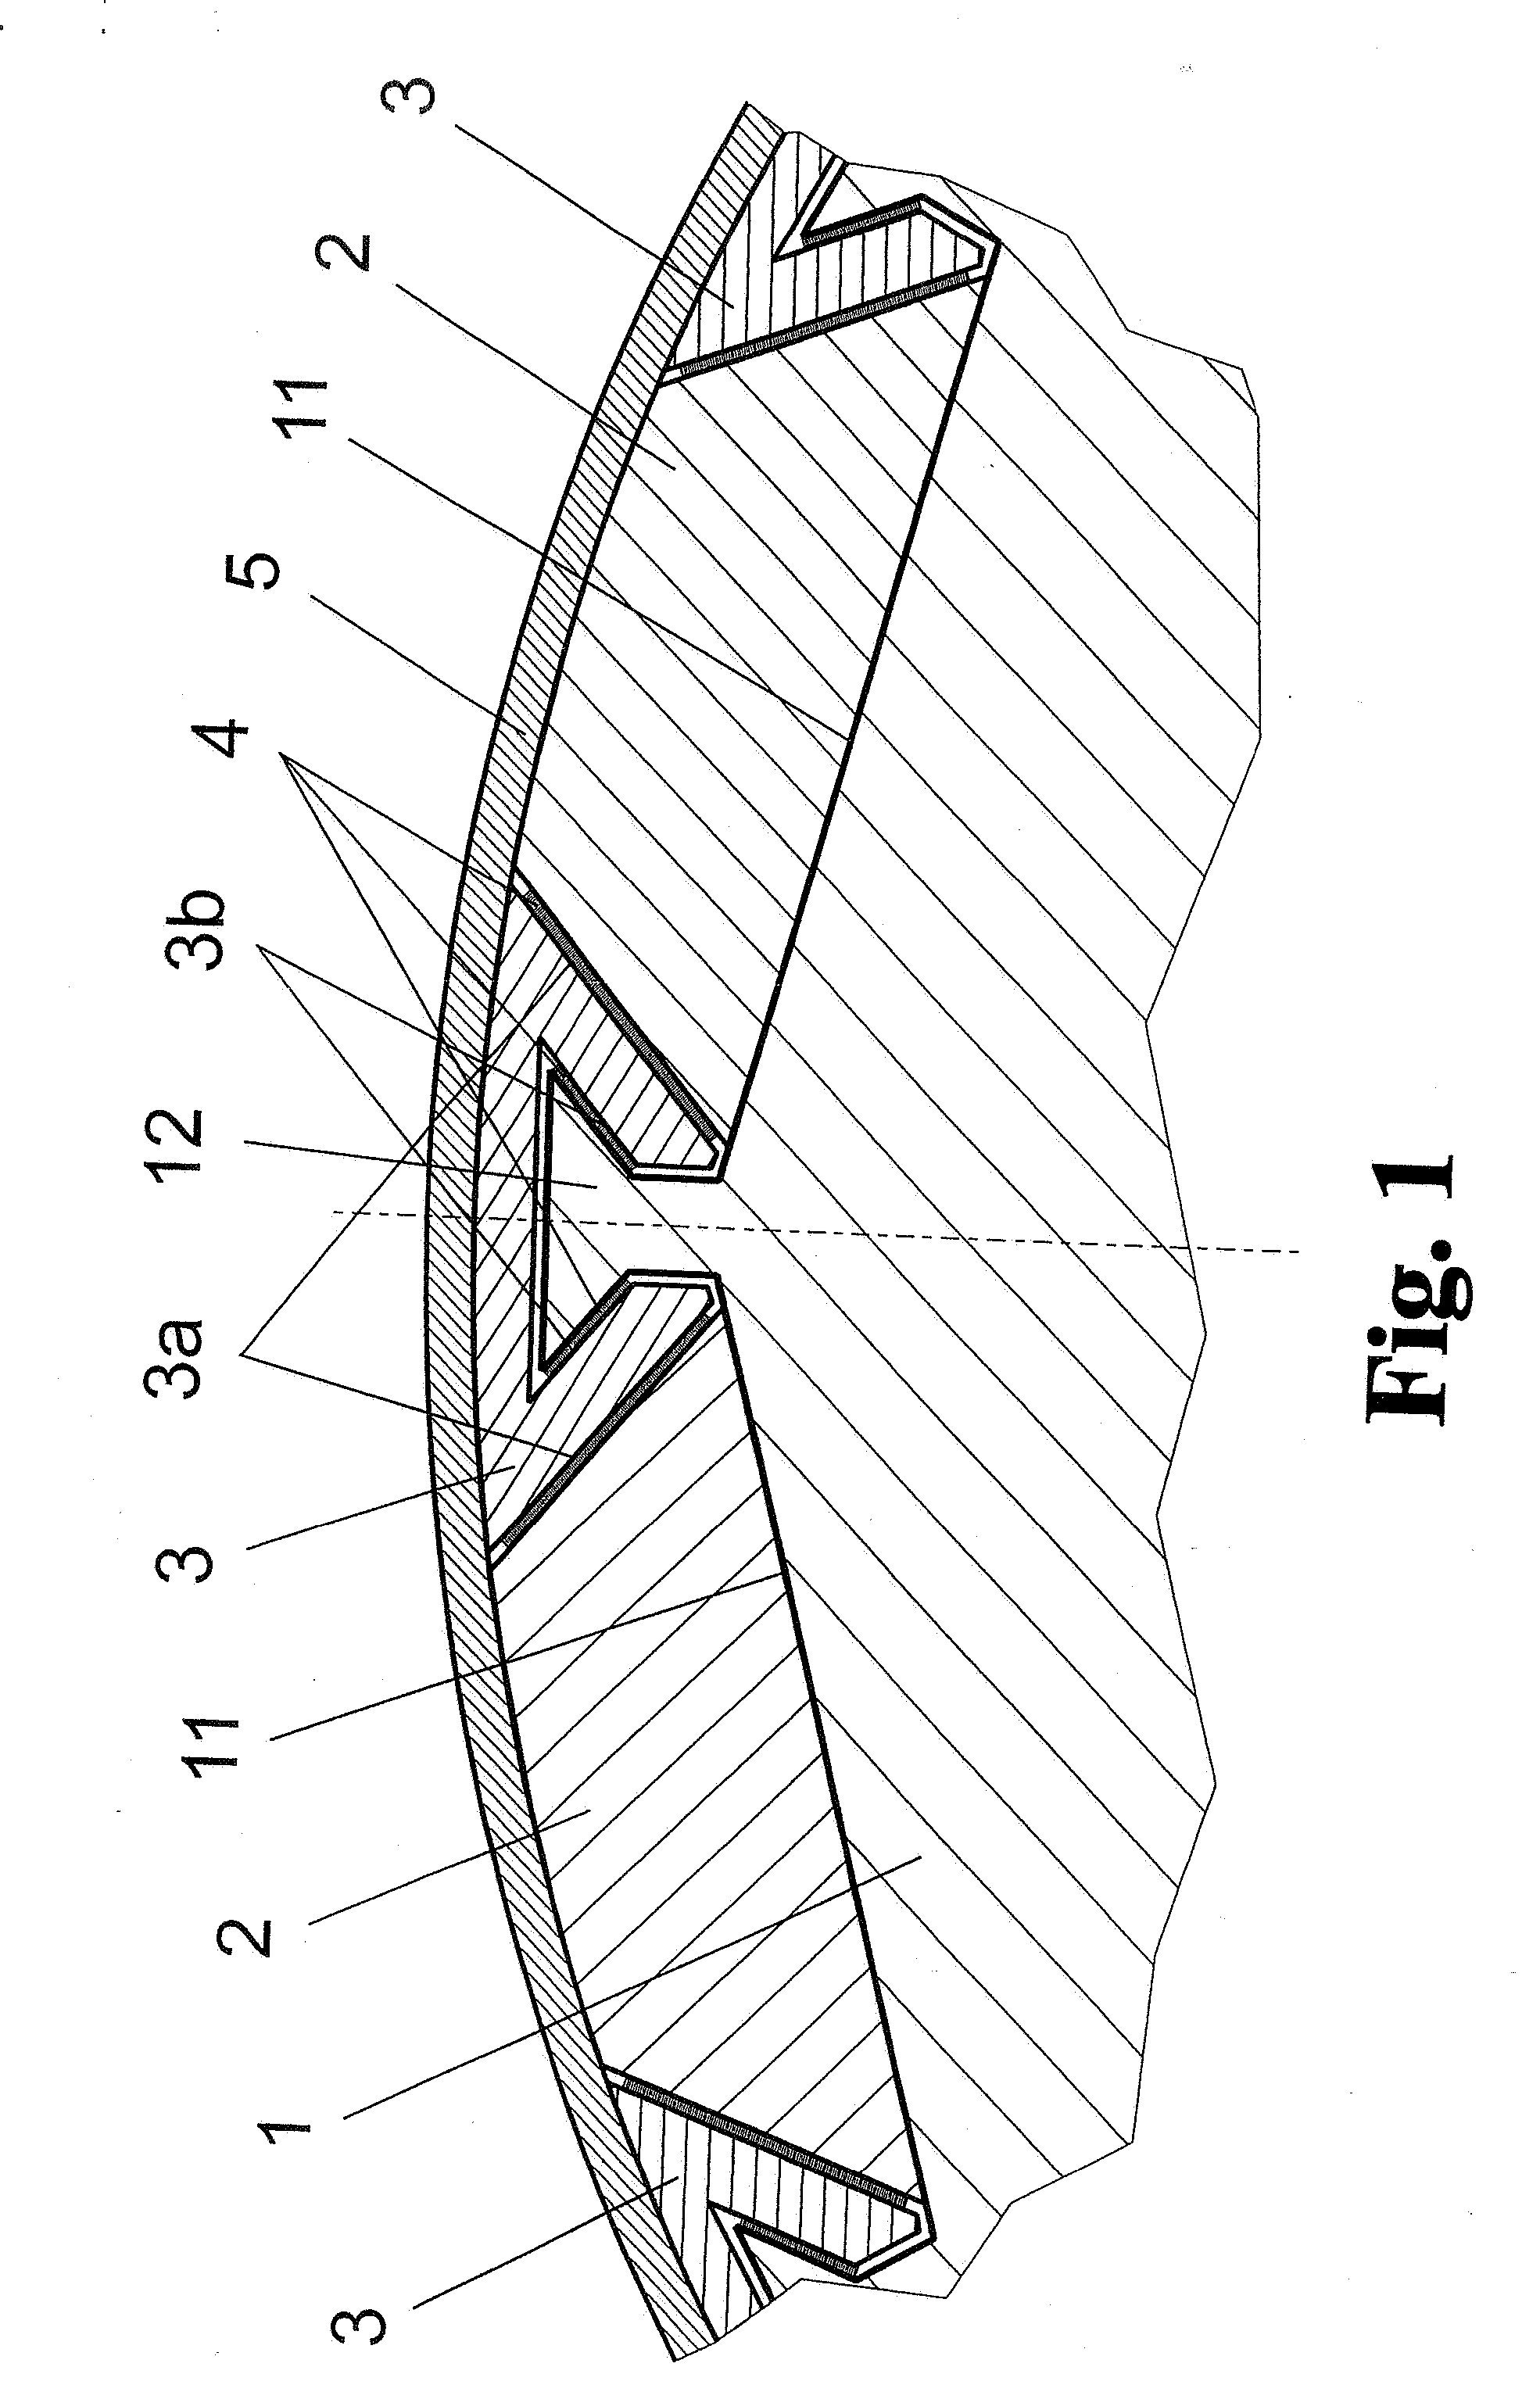 Arrangement for fastening permanent magnets to rapidly rotating rotors of electric machines